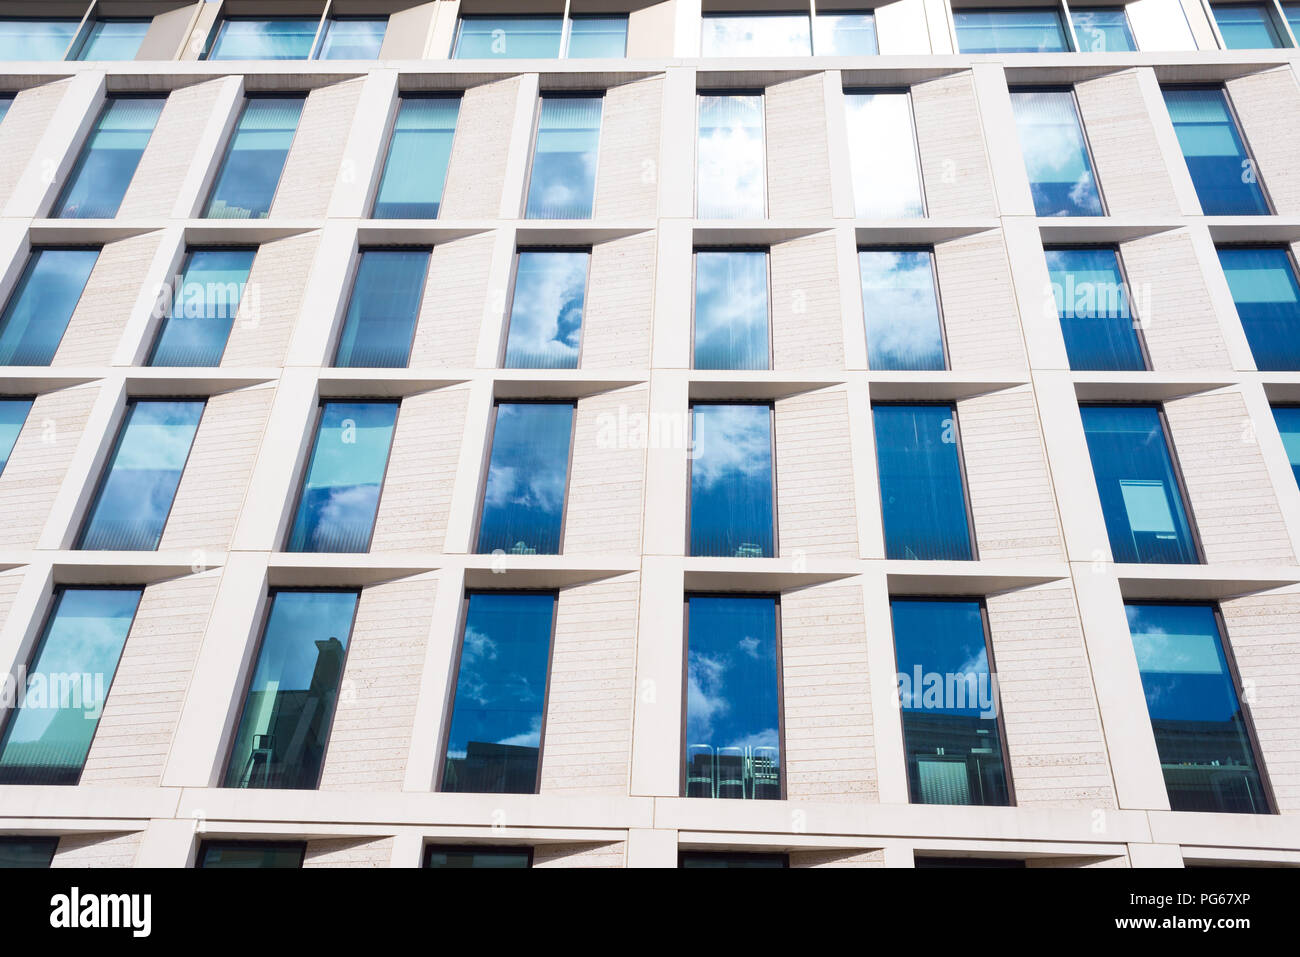 Facade of a modern style office building with multiple big glass windows Stock Photo